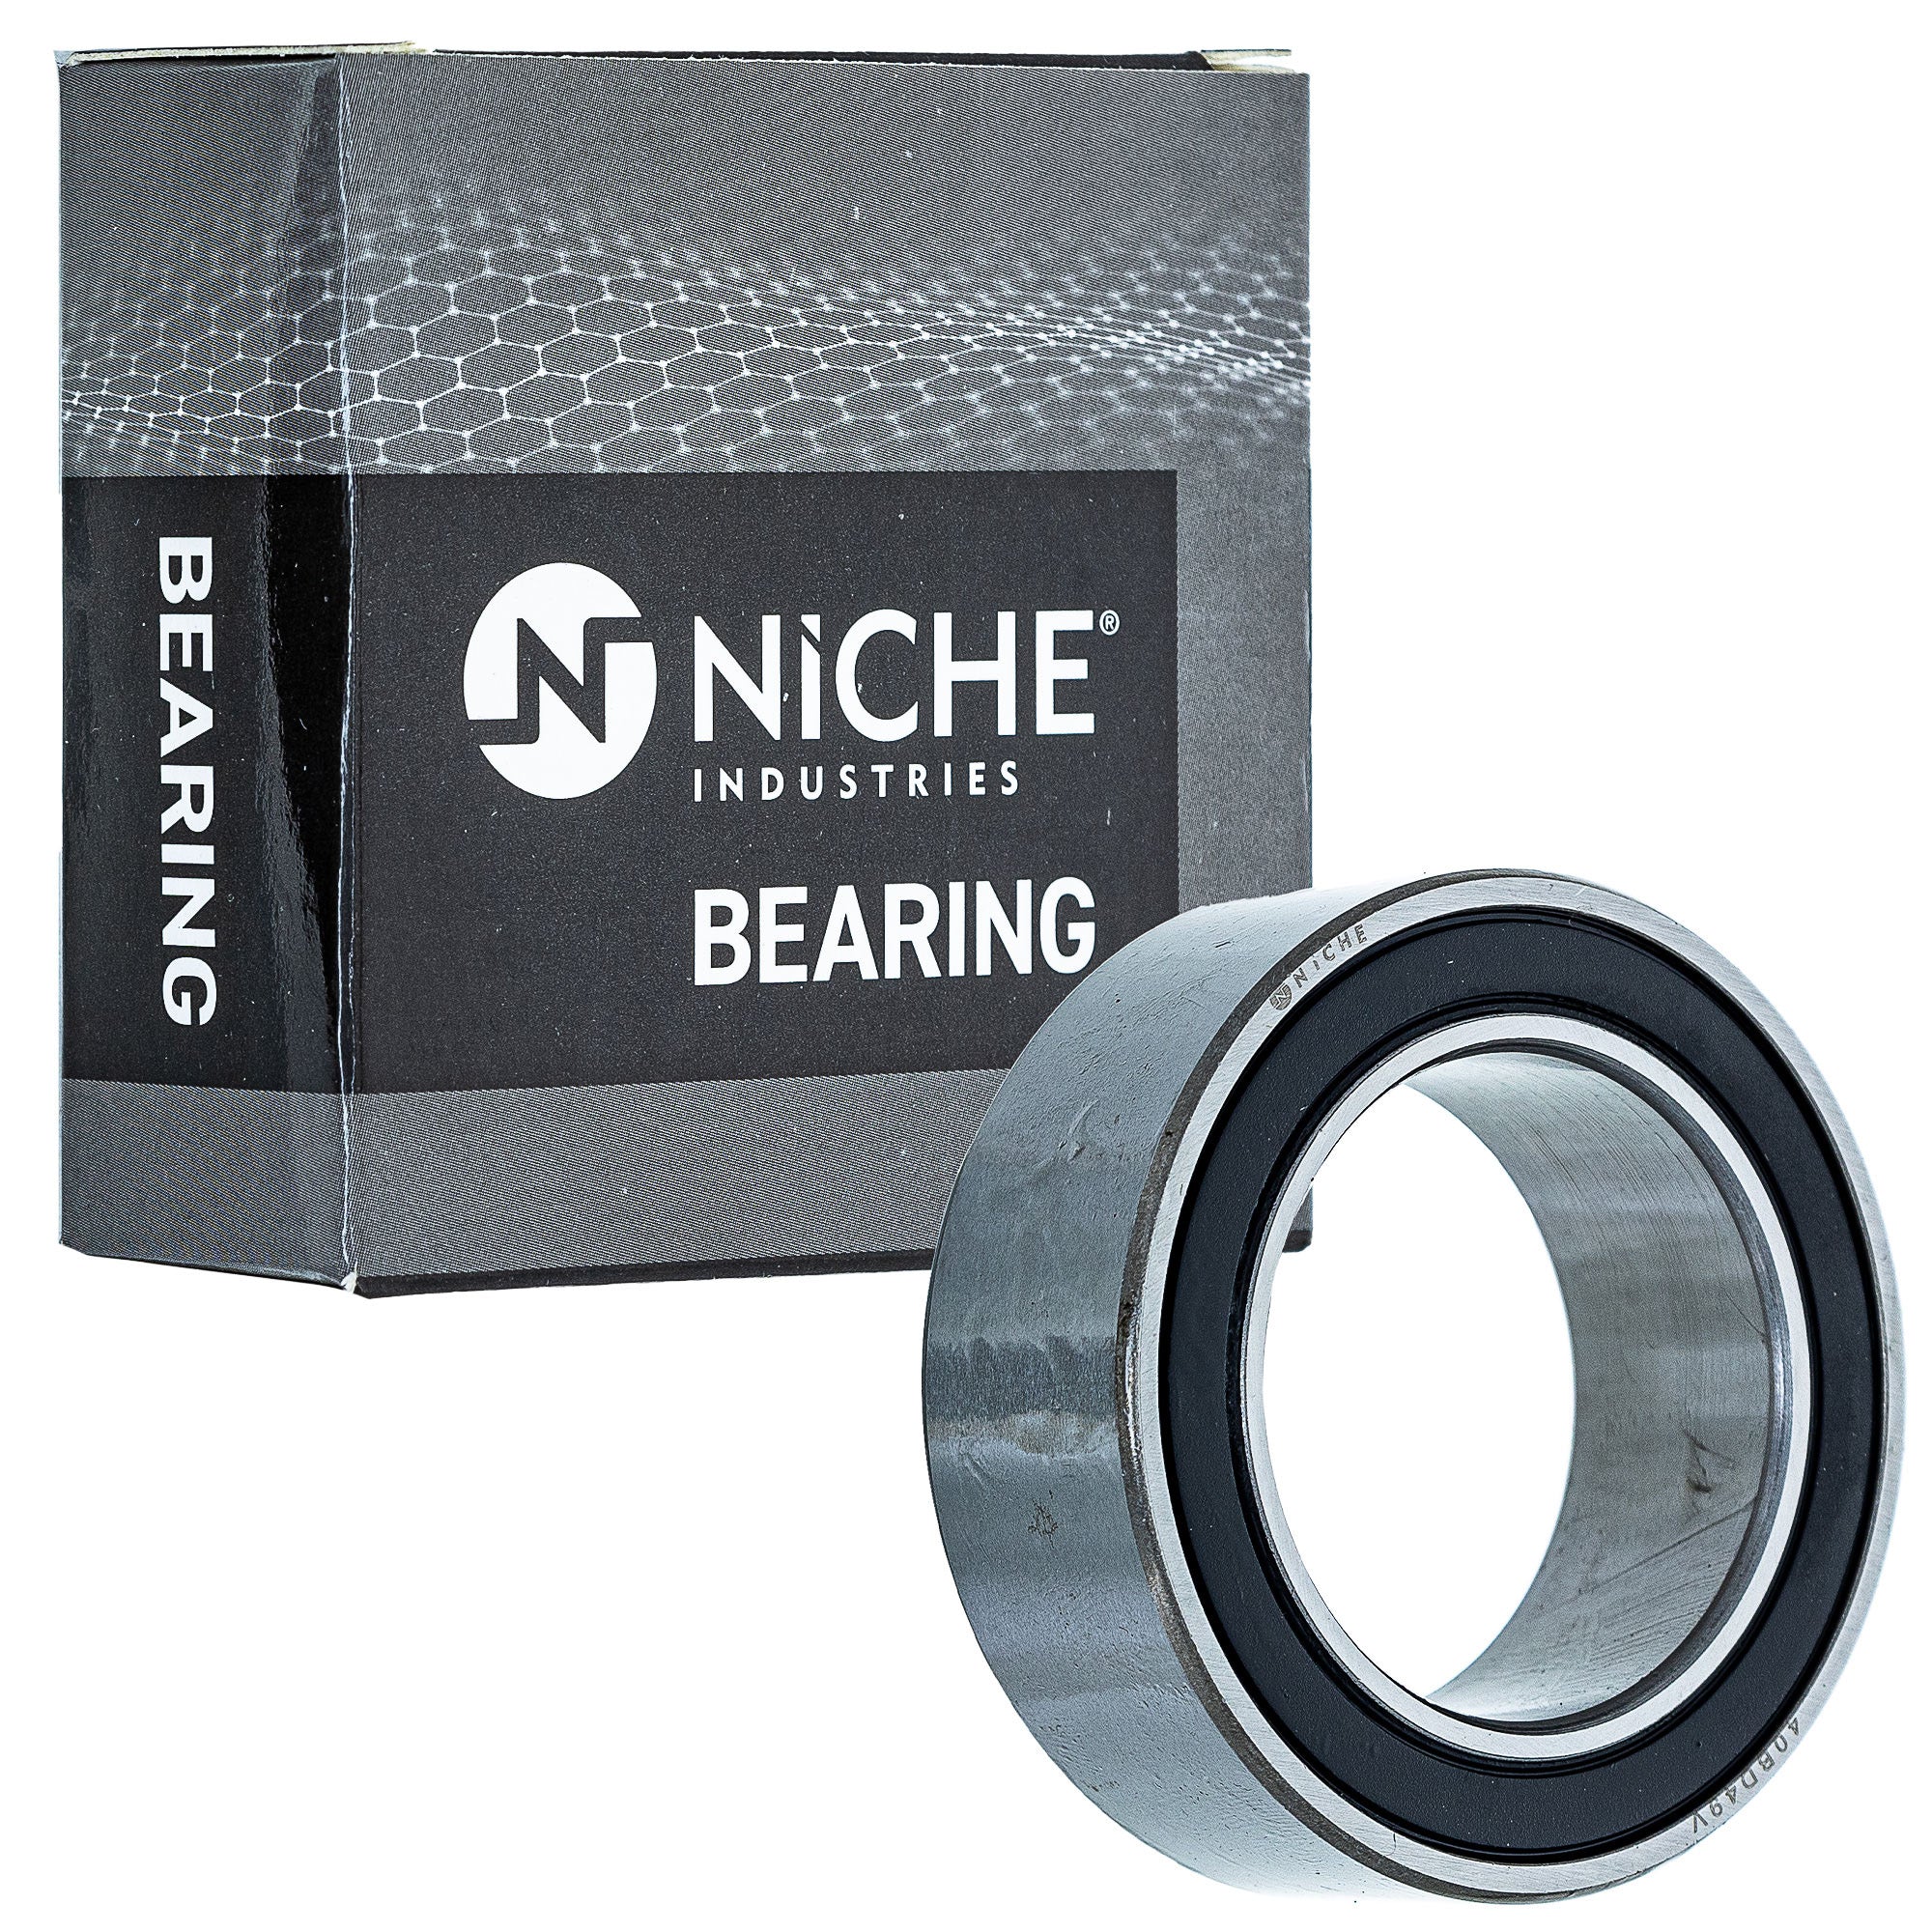 NICHE 519-CBB2202R Bearing 2-Pack for zOTHER DS